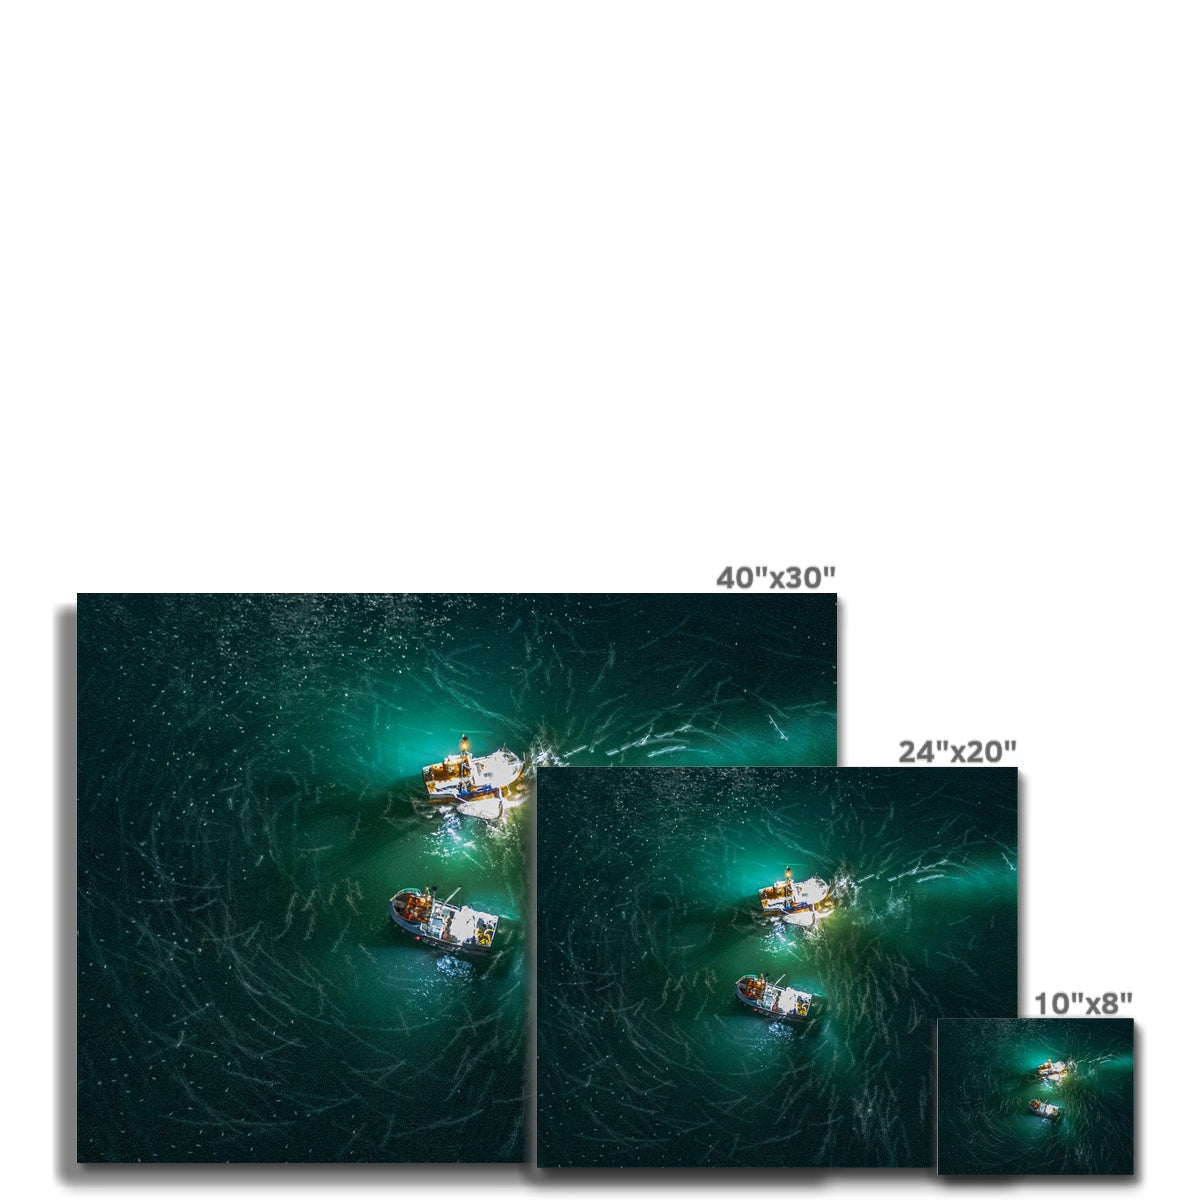 fishing boats by moonlight canvas sizes